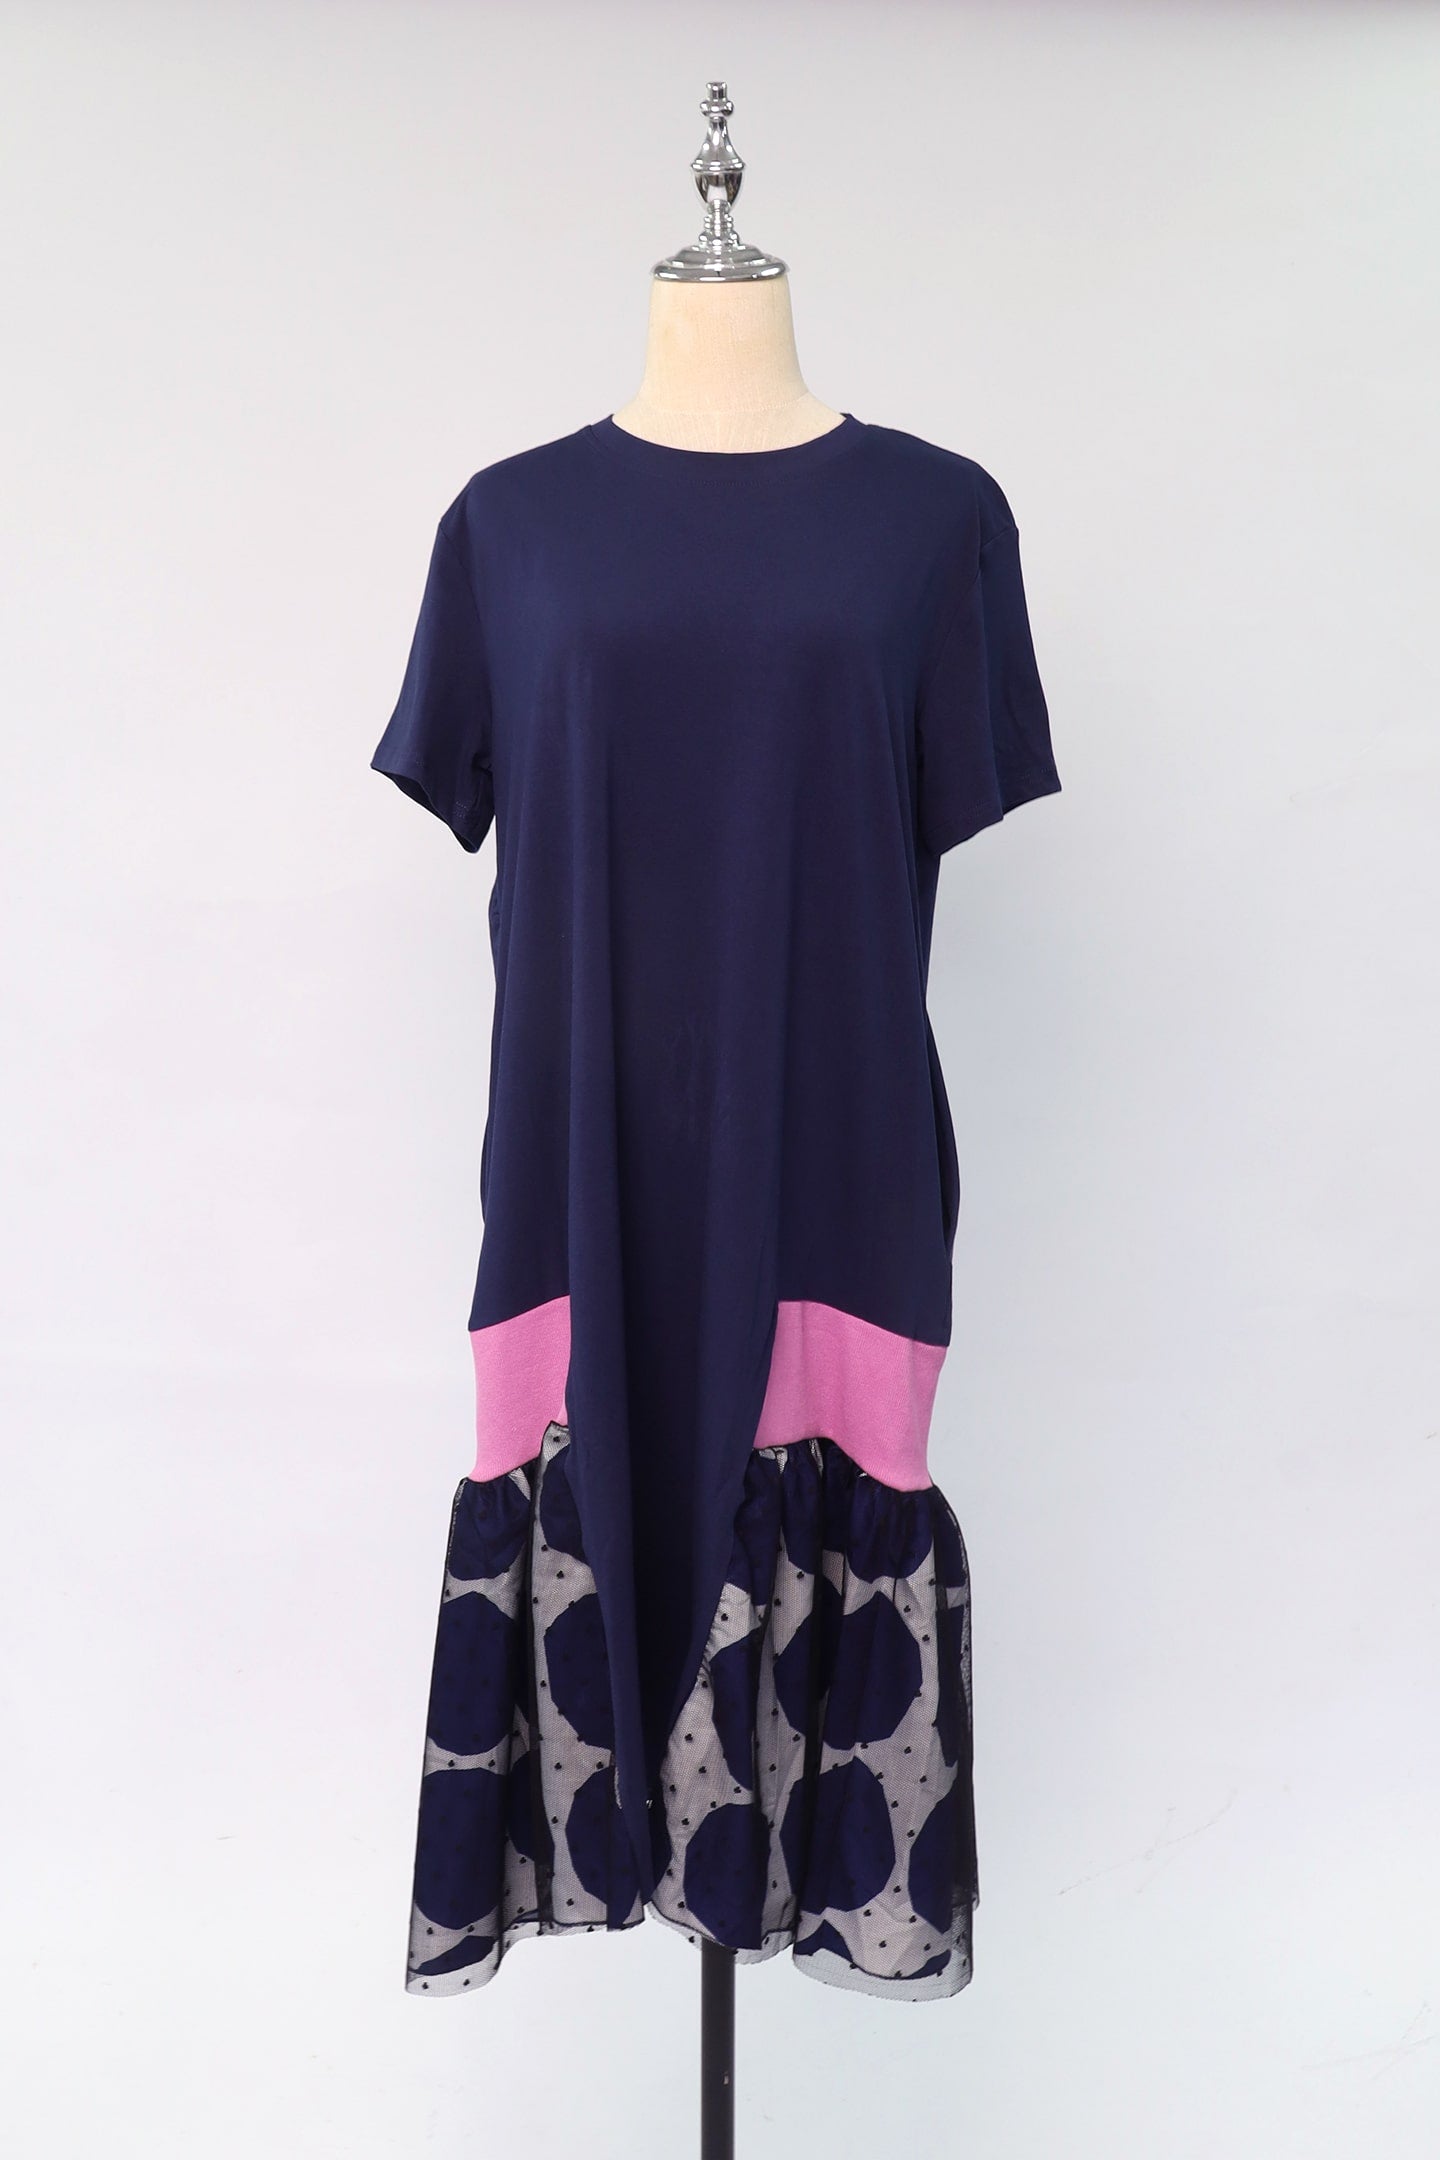 PO - Harlow Dress in Blue Circles